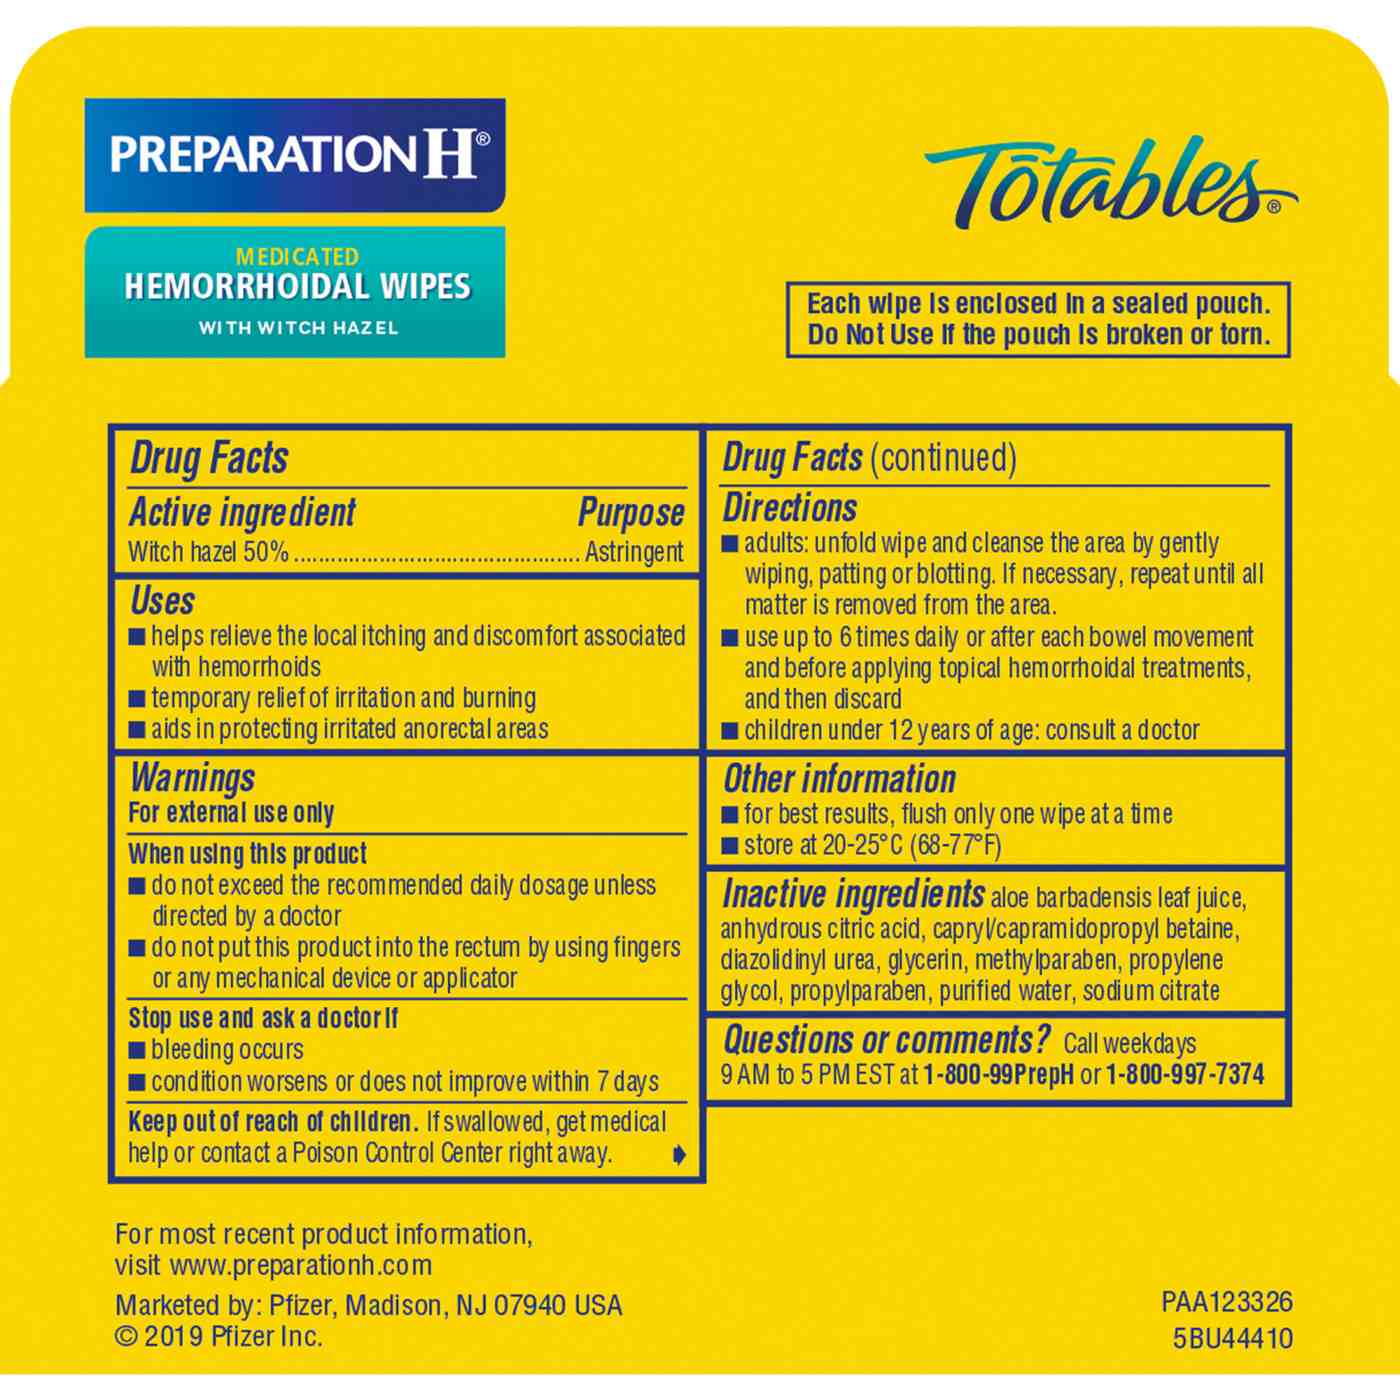 Preparation H Flushable Medicated Hemorrhoidal Wipes Max Strength Relief; image 2 of 4